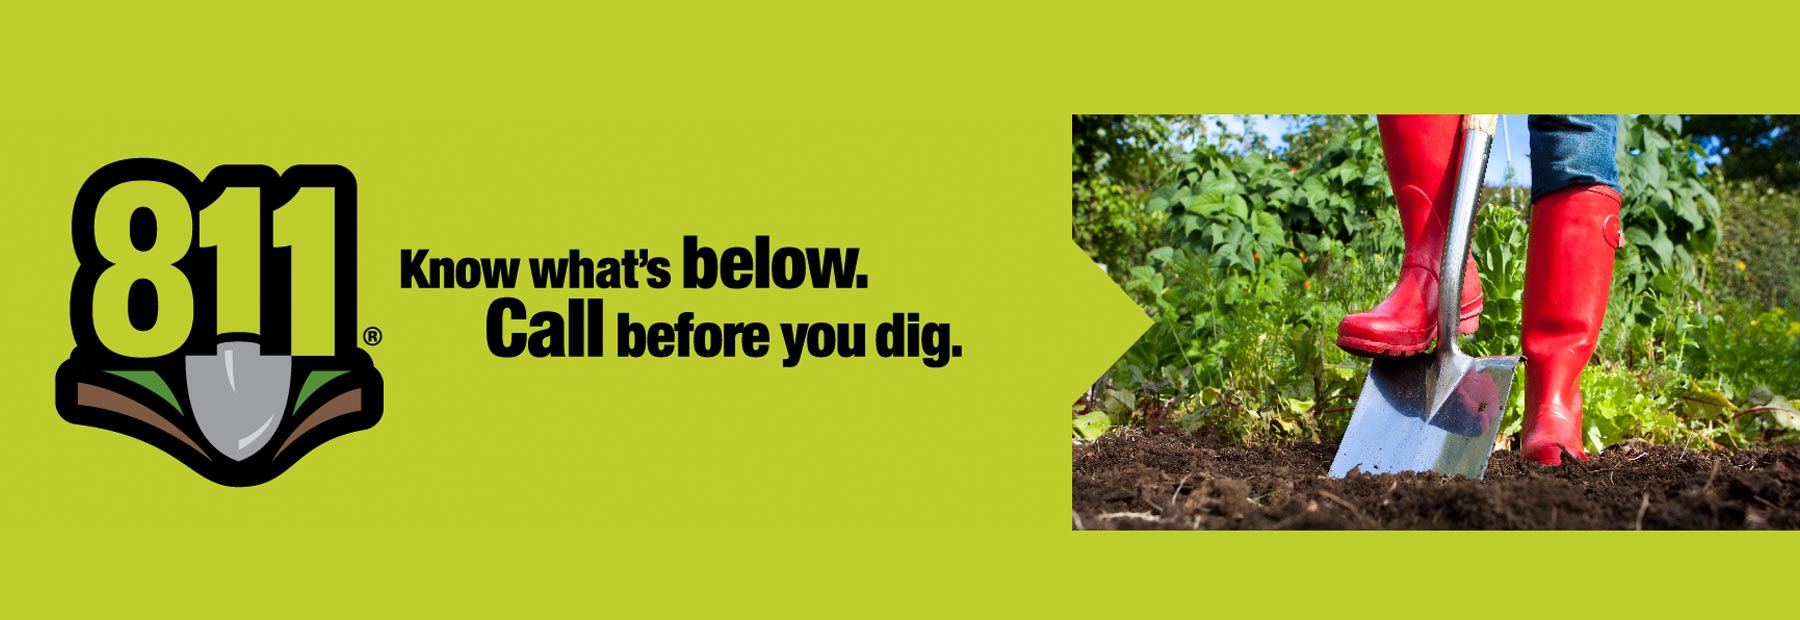 call before you dig